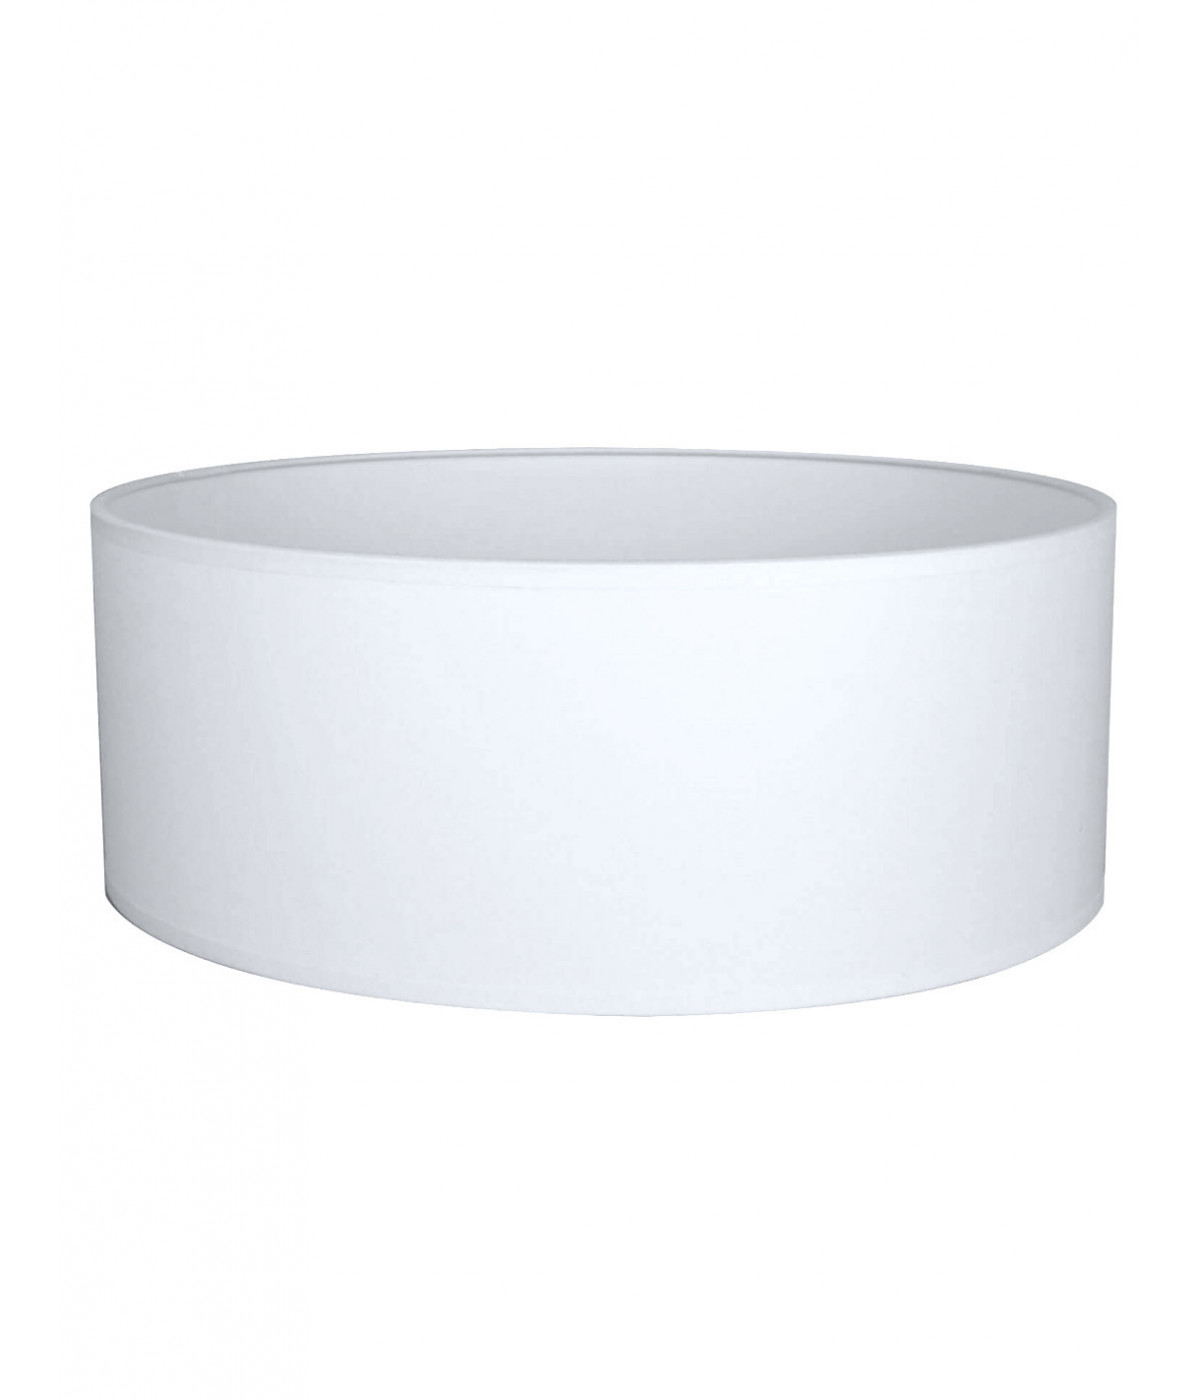 White oval shade